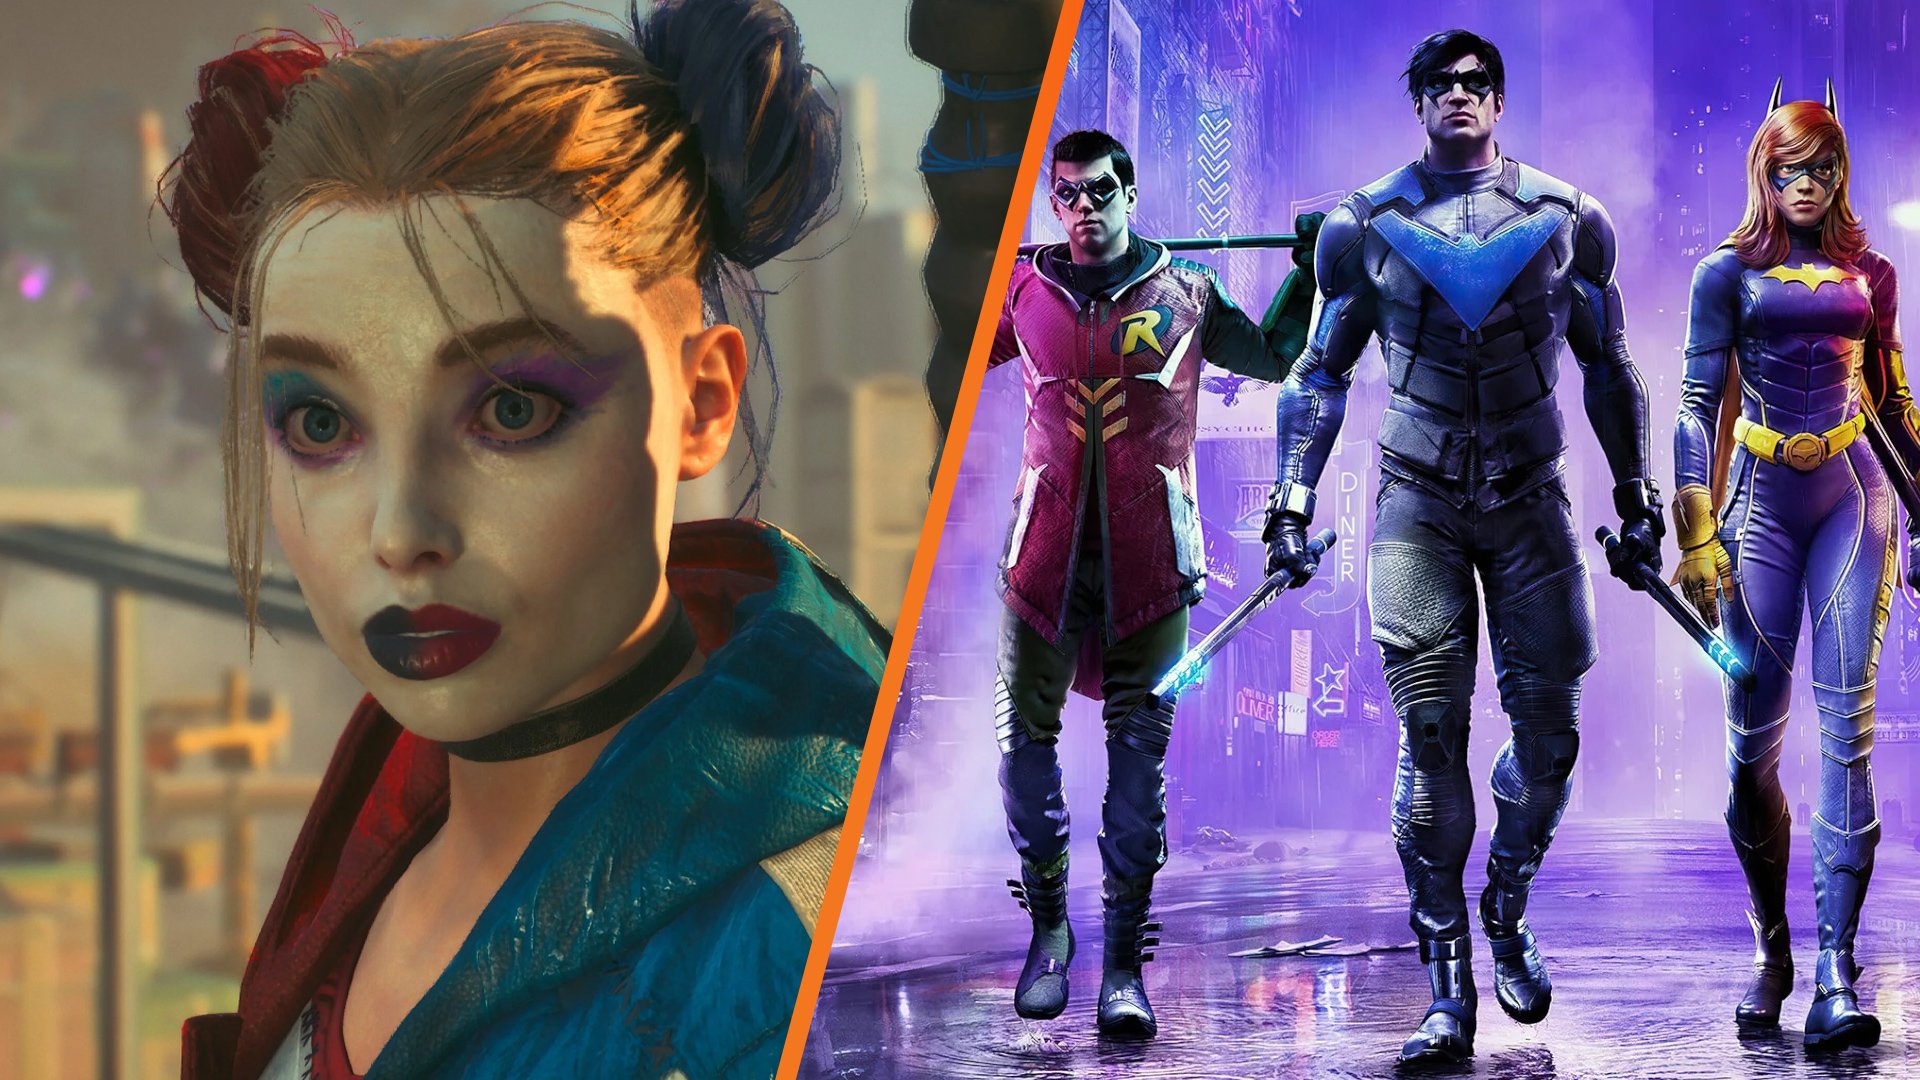 Suicide Squad sees decline in Steam player count as Gotham Knights gains momentum